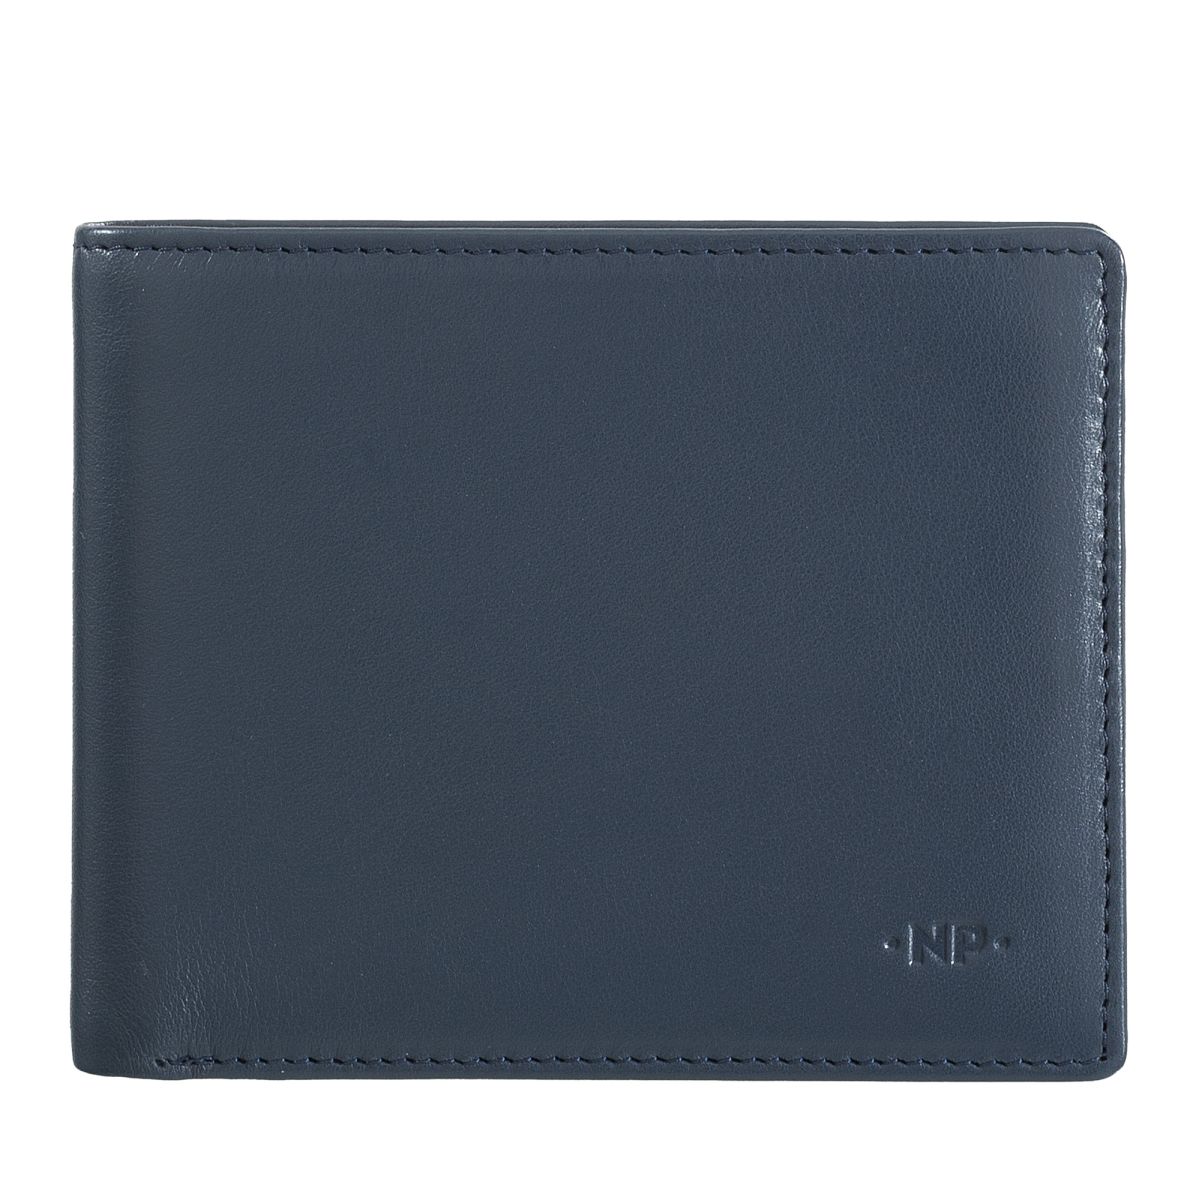 NUVOLA PELLE Slim Leather Wallet With Coin Pocket - Blue